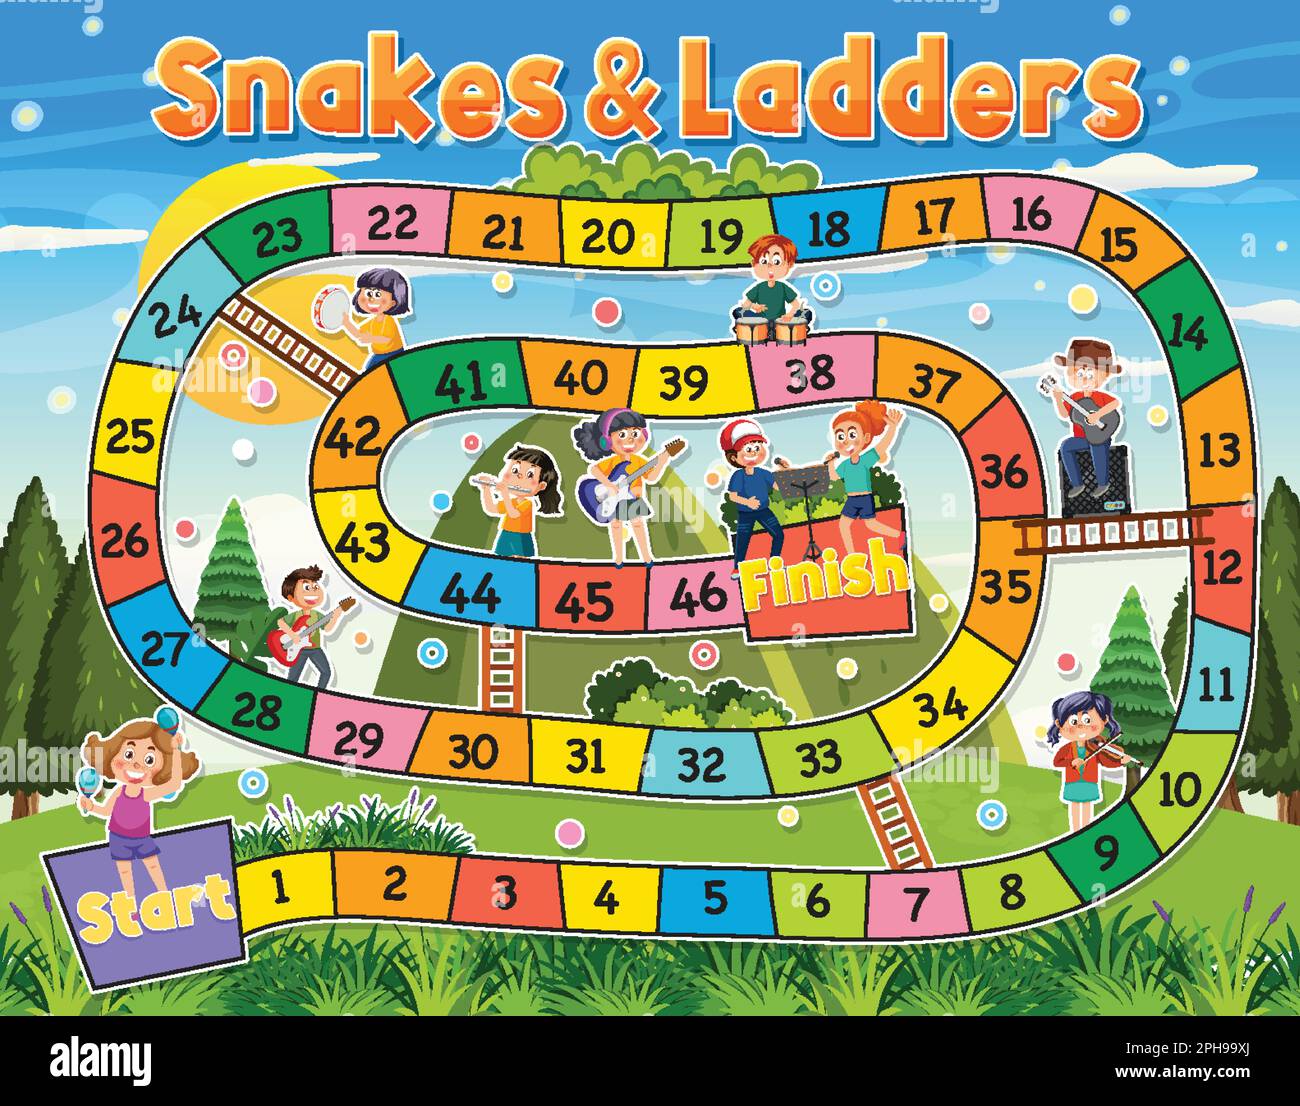 Premium Vector  Board game template snakes and ladders